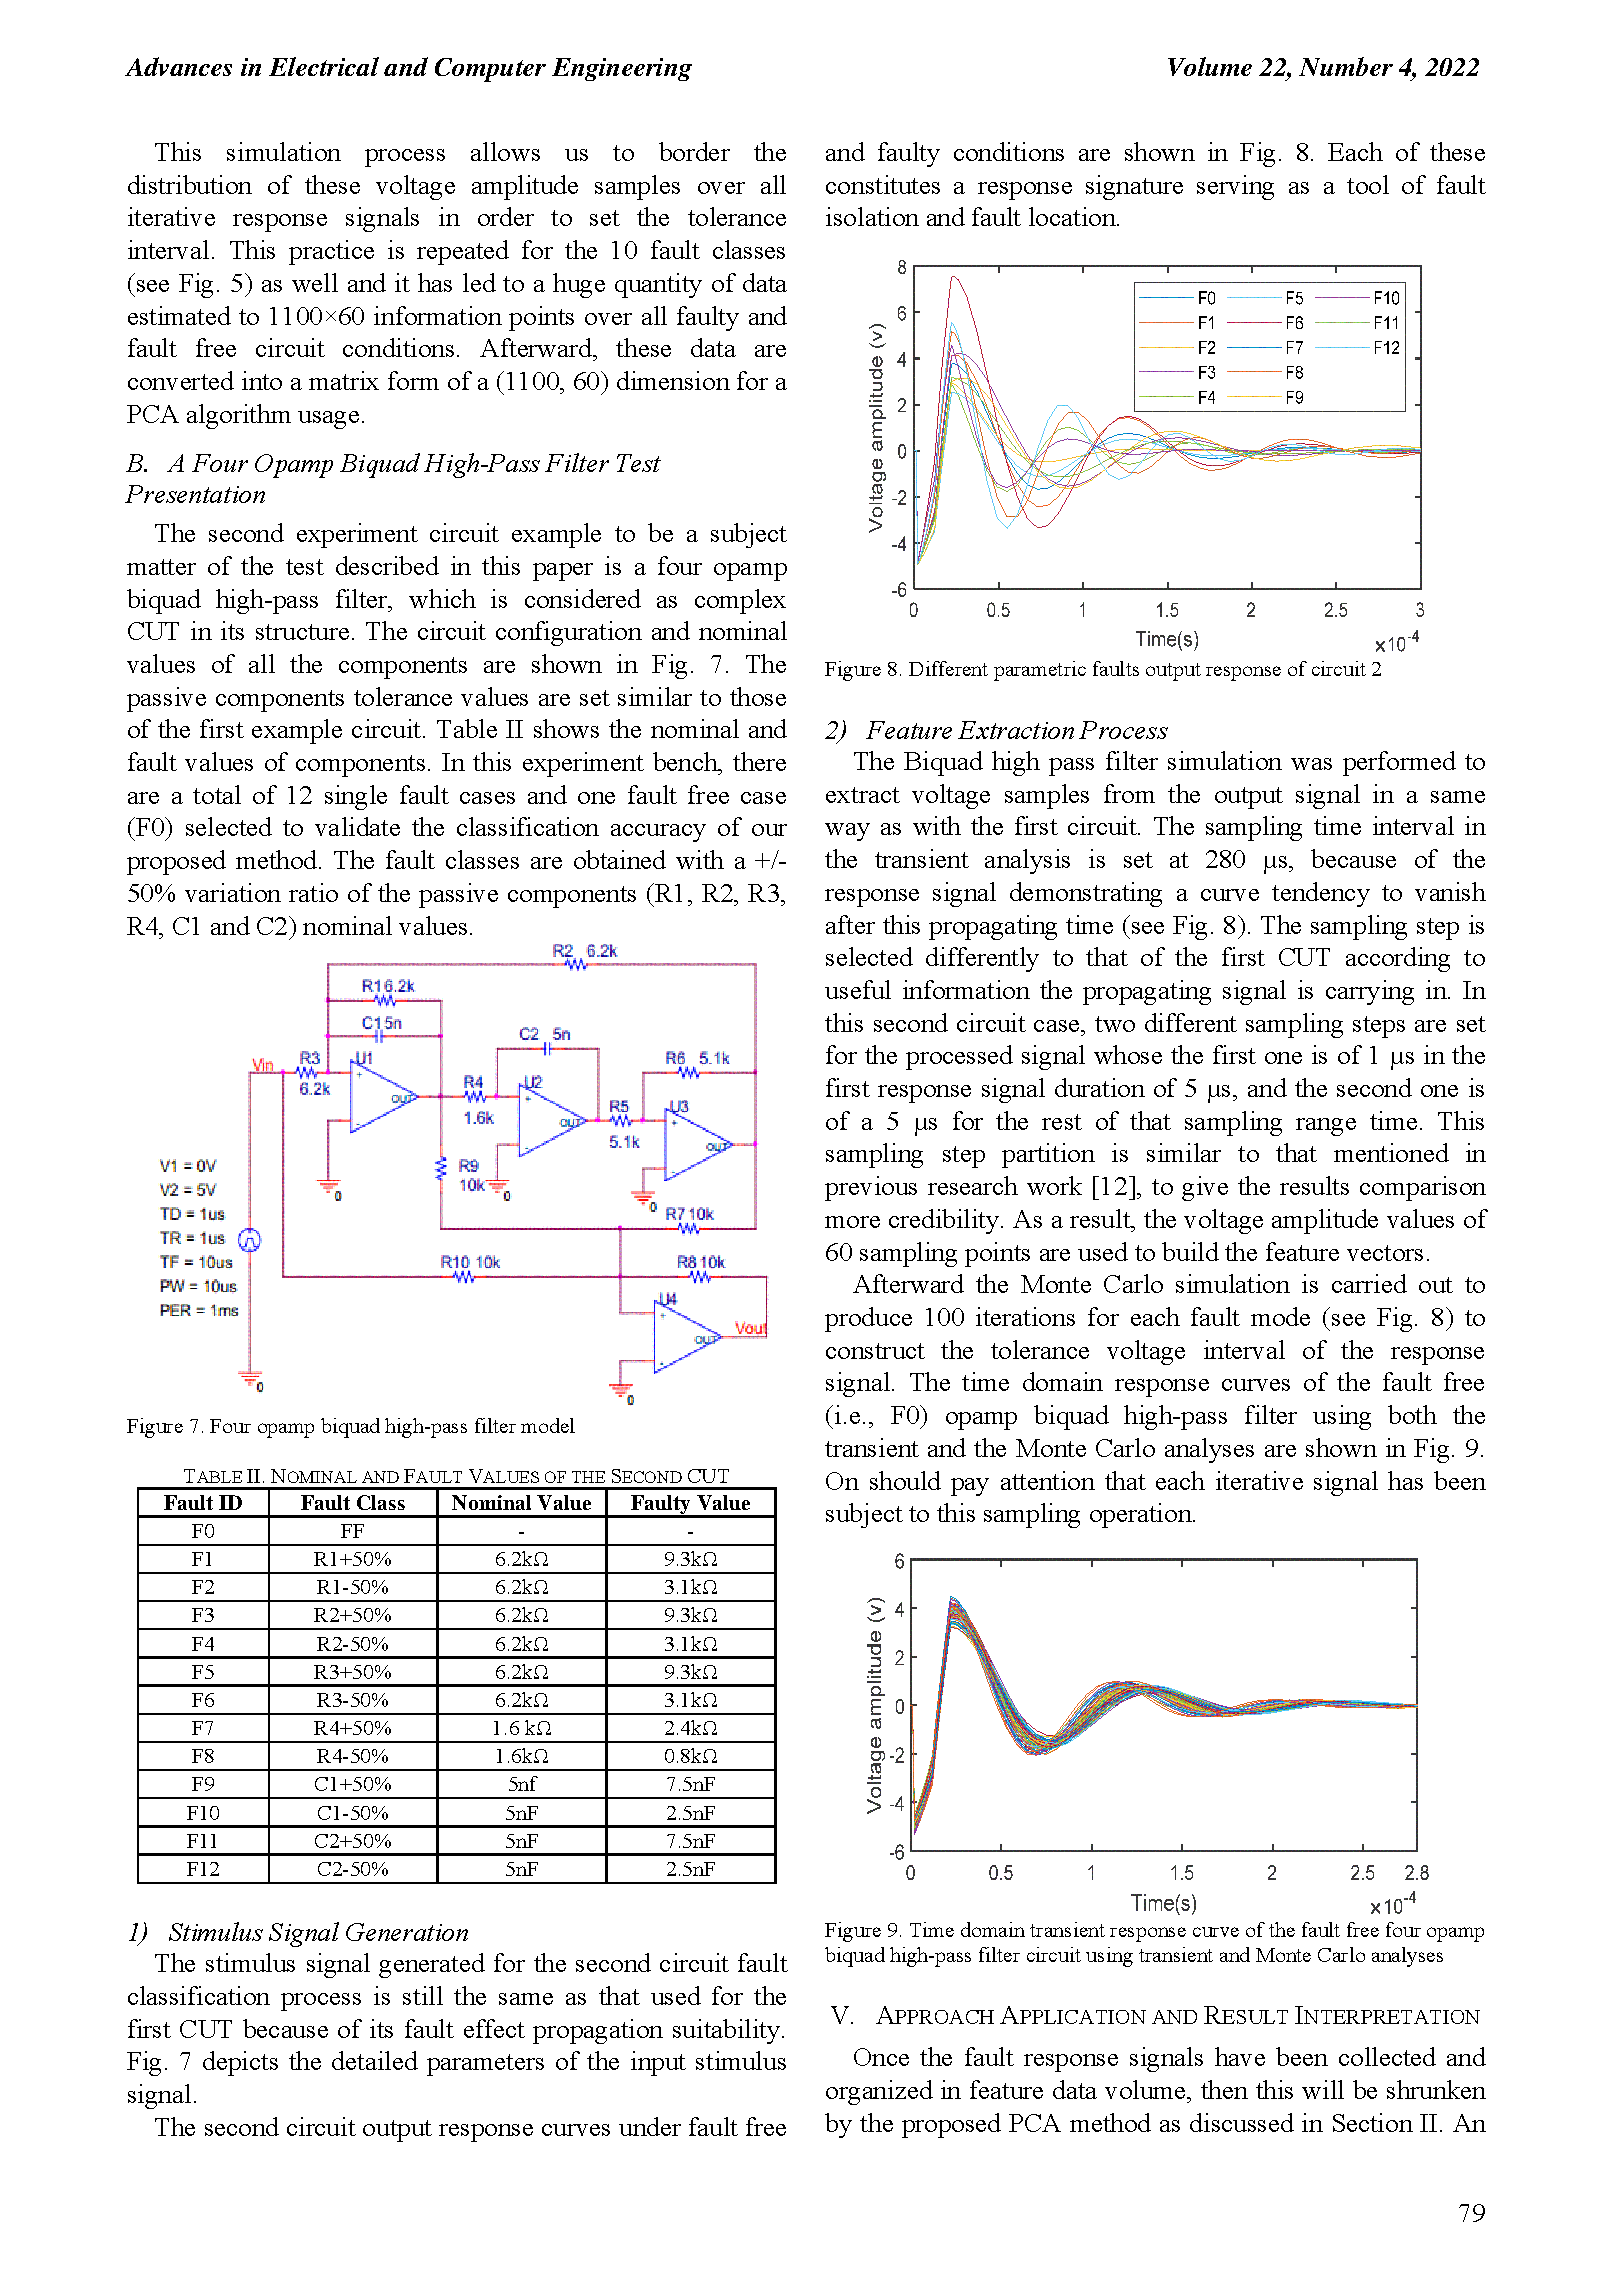 PDF Quickview for paper with DOI:10.4316/AECE.2022.04009